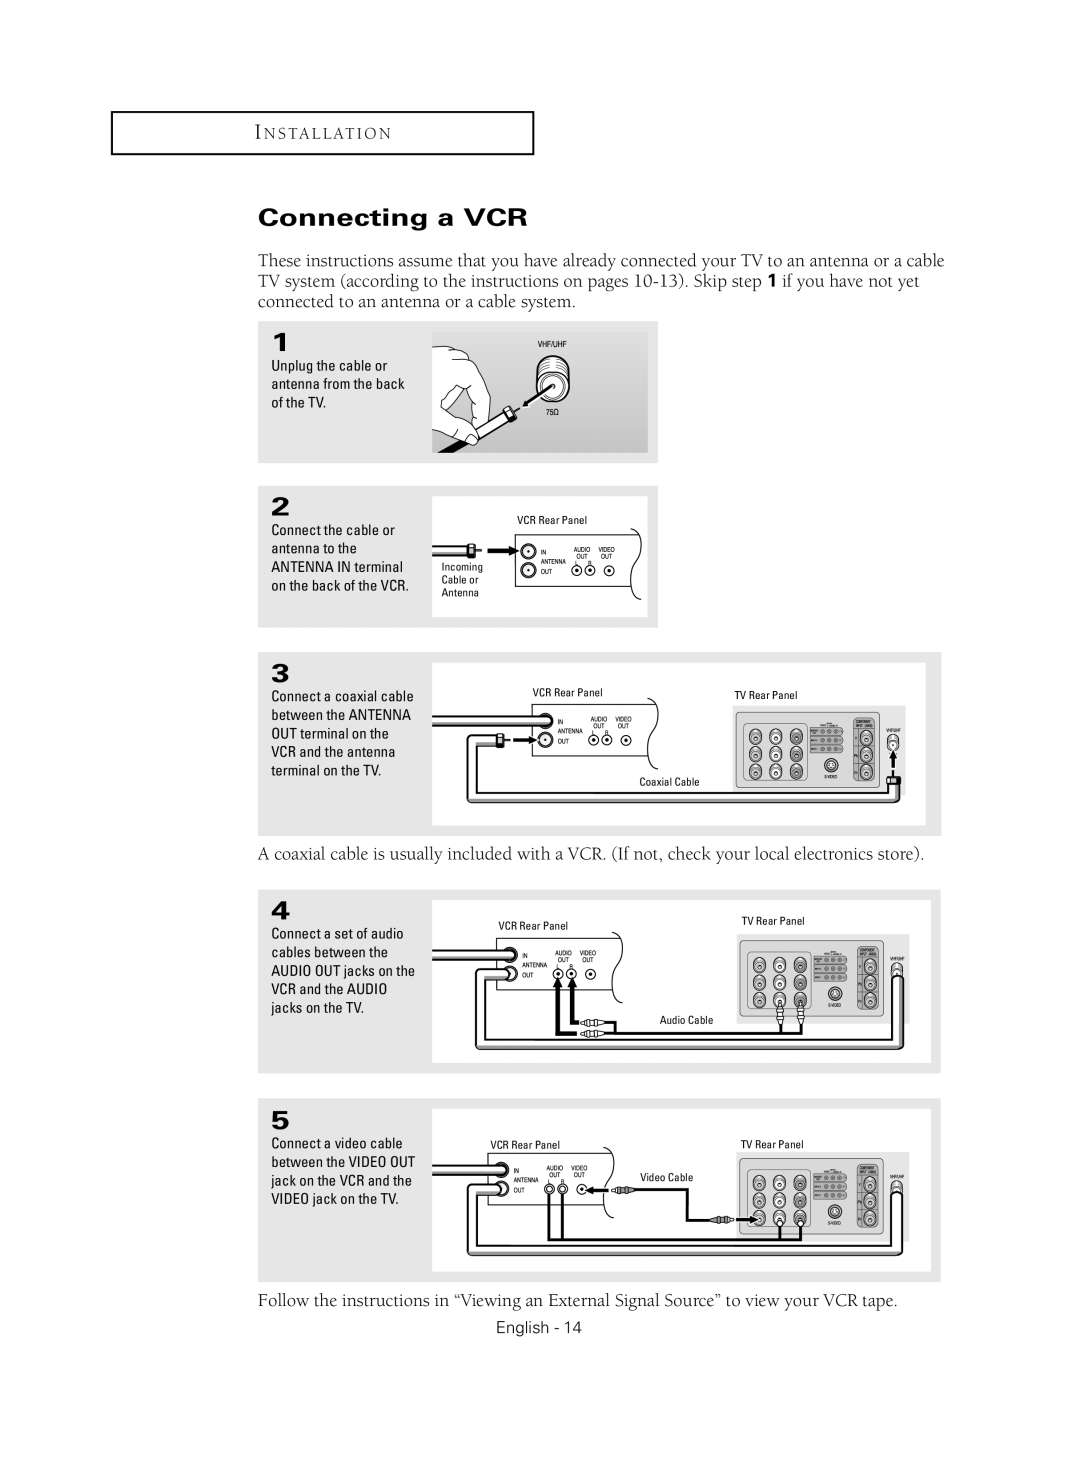 Samsung TX-R2735G manual Connecting a VCR, Unplug the cable or antenna from the back of the TV 